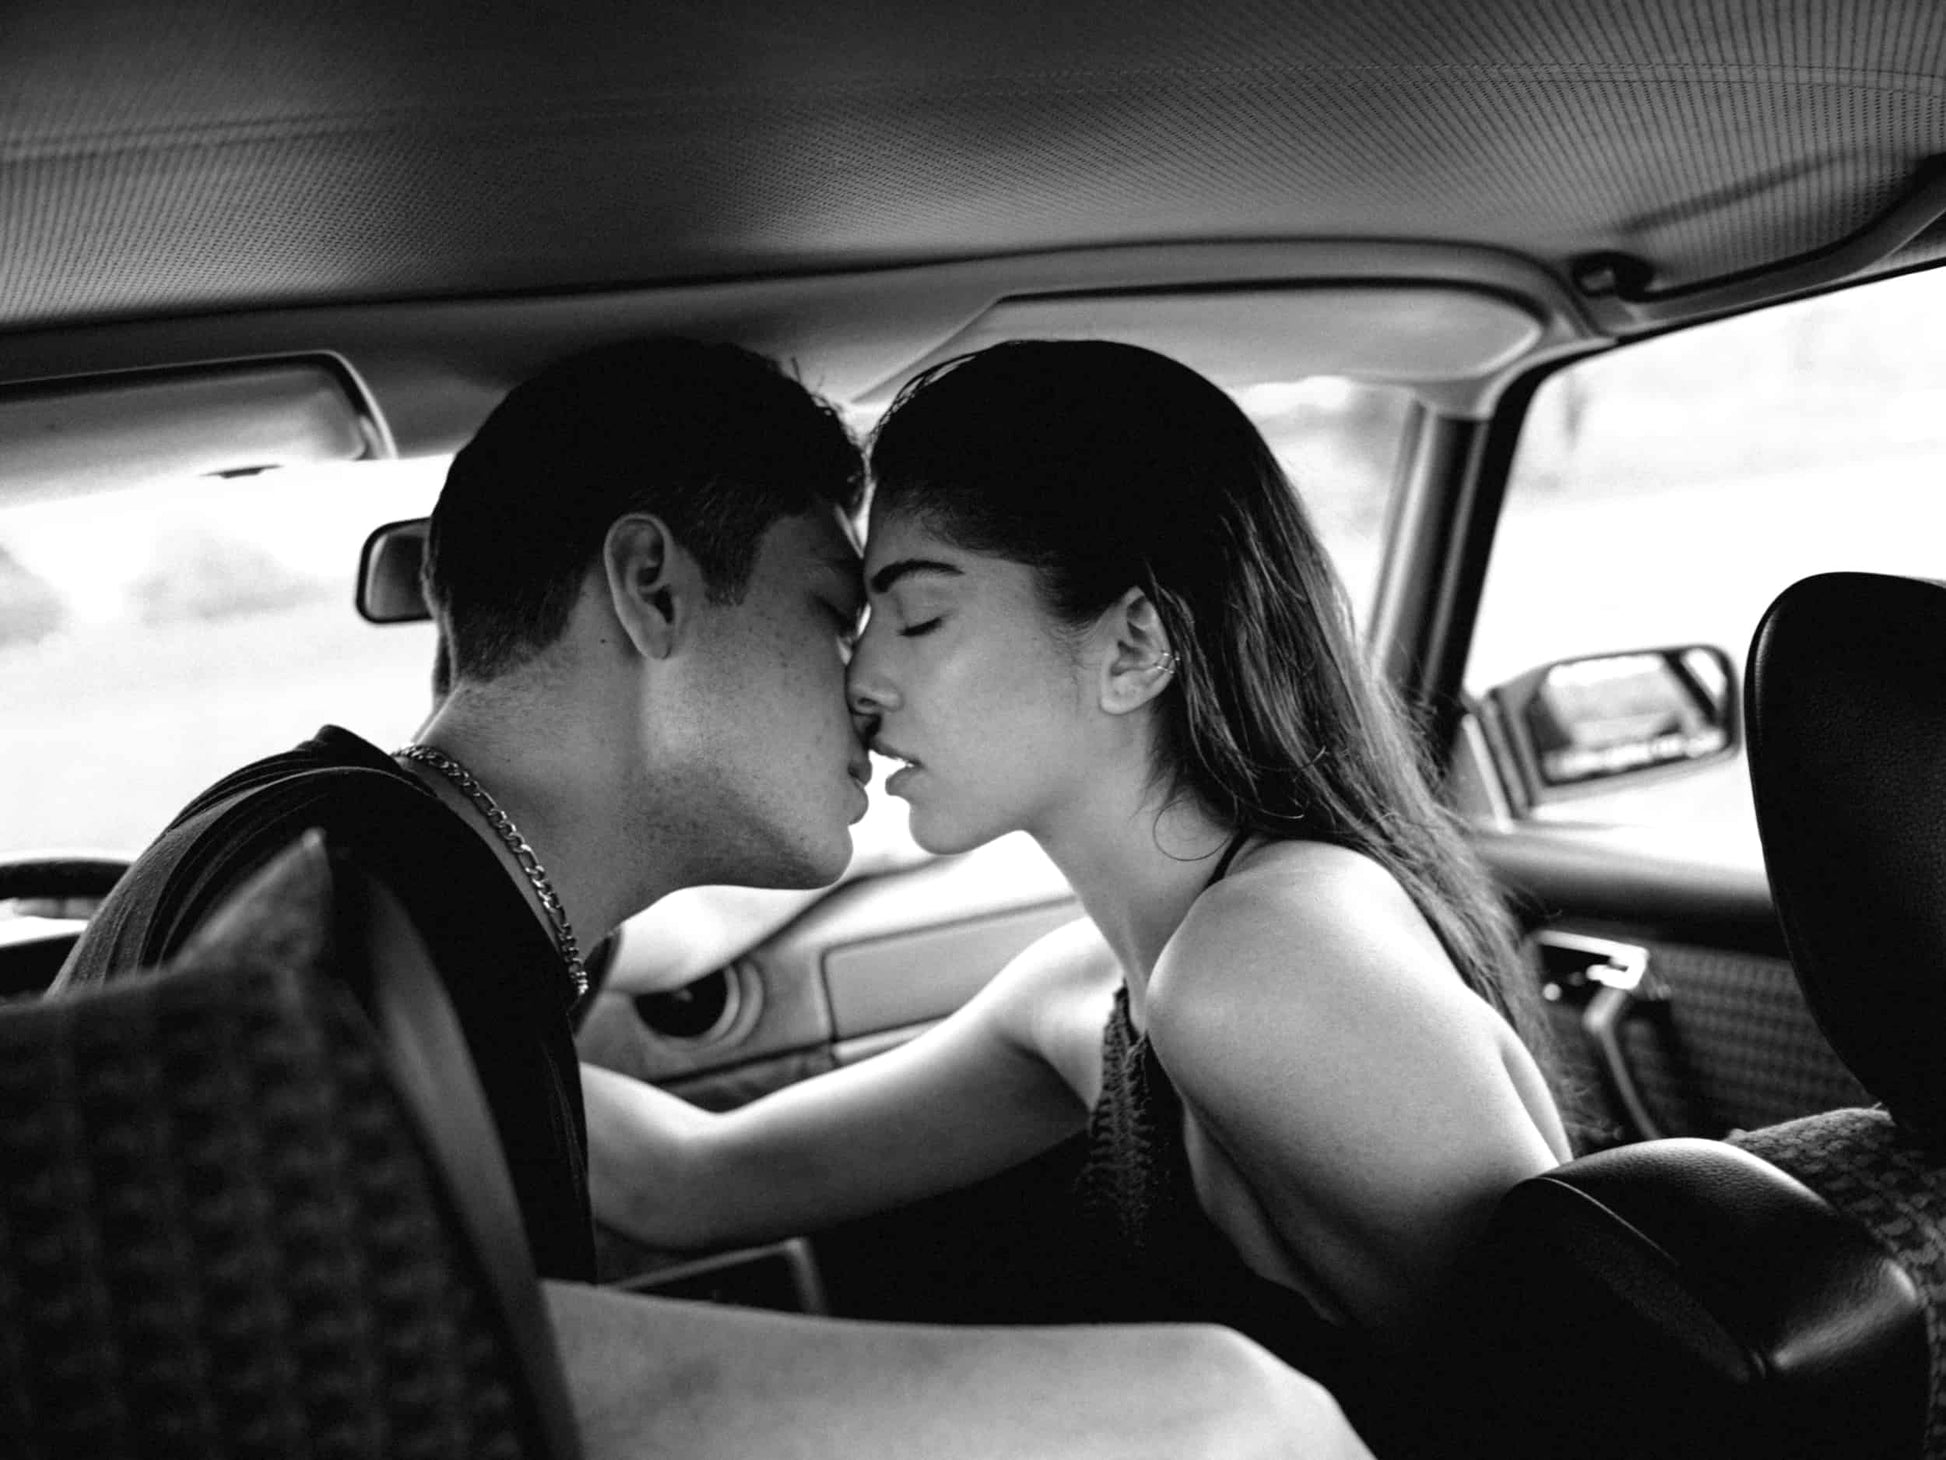 The fine-art piece 'Kiss Me' by Mikail Sahin shows two lovers, giving each other a passionate kiss on the backseat of a classic car.